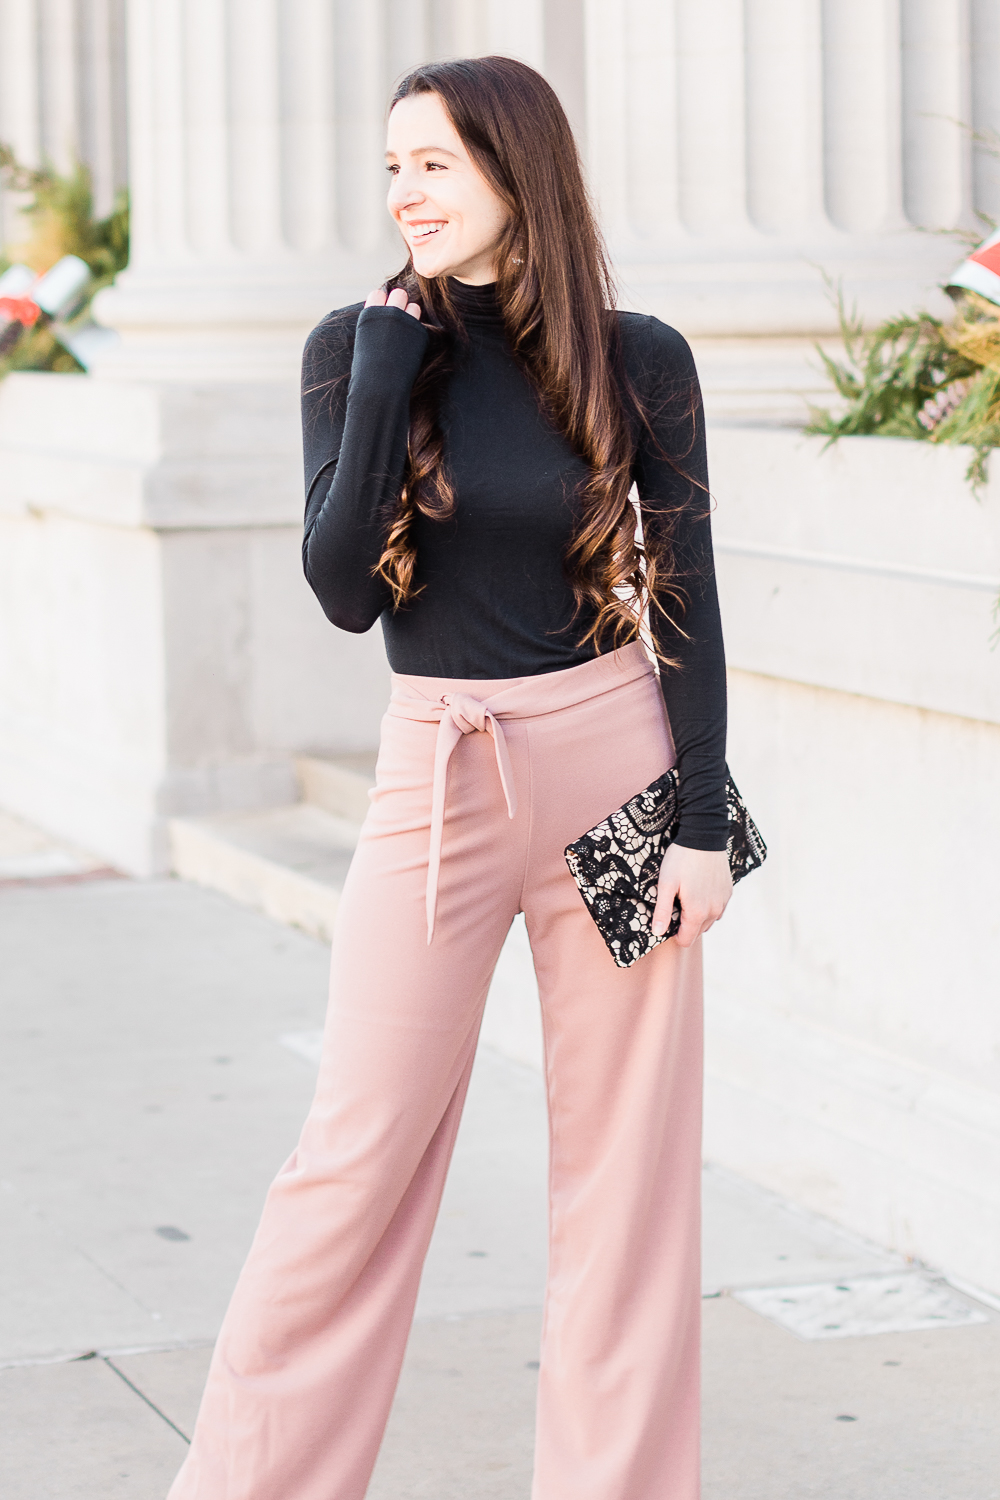 Trend to Try: Shein Self Tie Palazzo Pants Outfit by affordable fashion blogger Stephanie Ziajka from Diary of a Debutante, Shein palazzo pants, Cuddl Duds black turtleneck, Jessica McClintock Riley Lace Envelope Clutch, LC Lauren Conrad block heel sandals, ways to wear palazzo pants, what kind of shirt to wear with palazzo pants